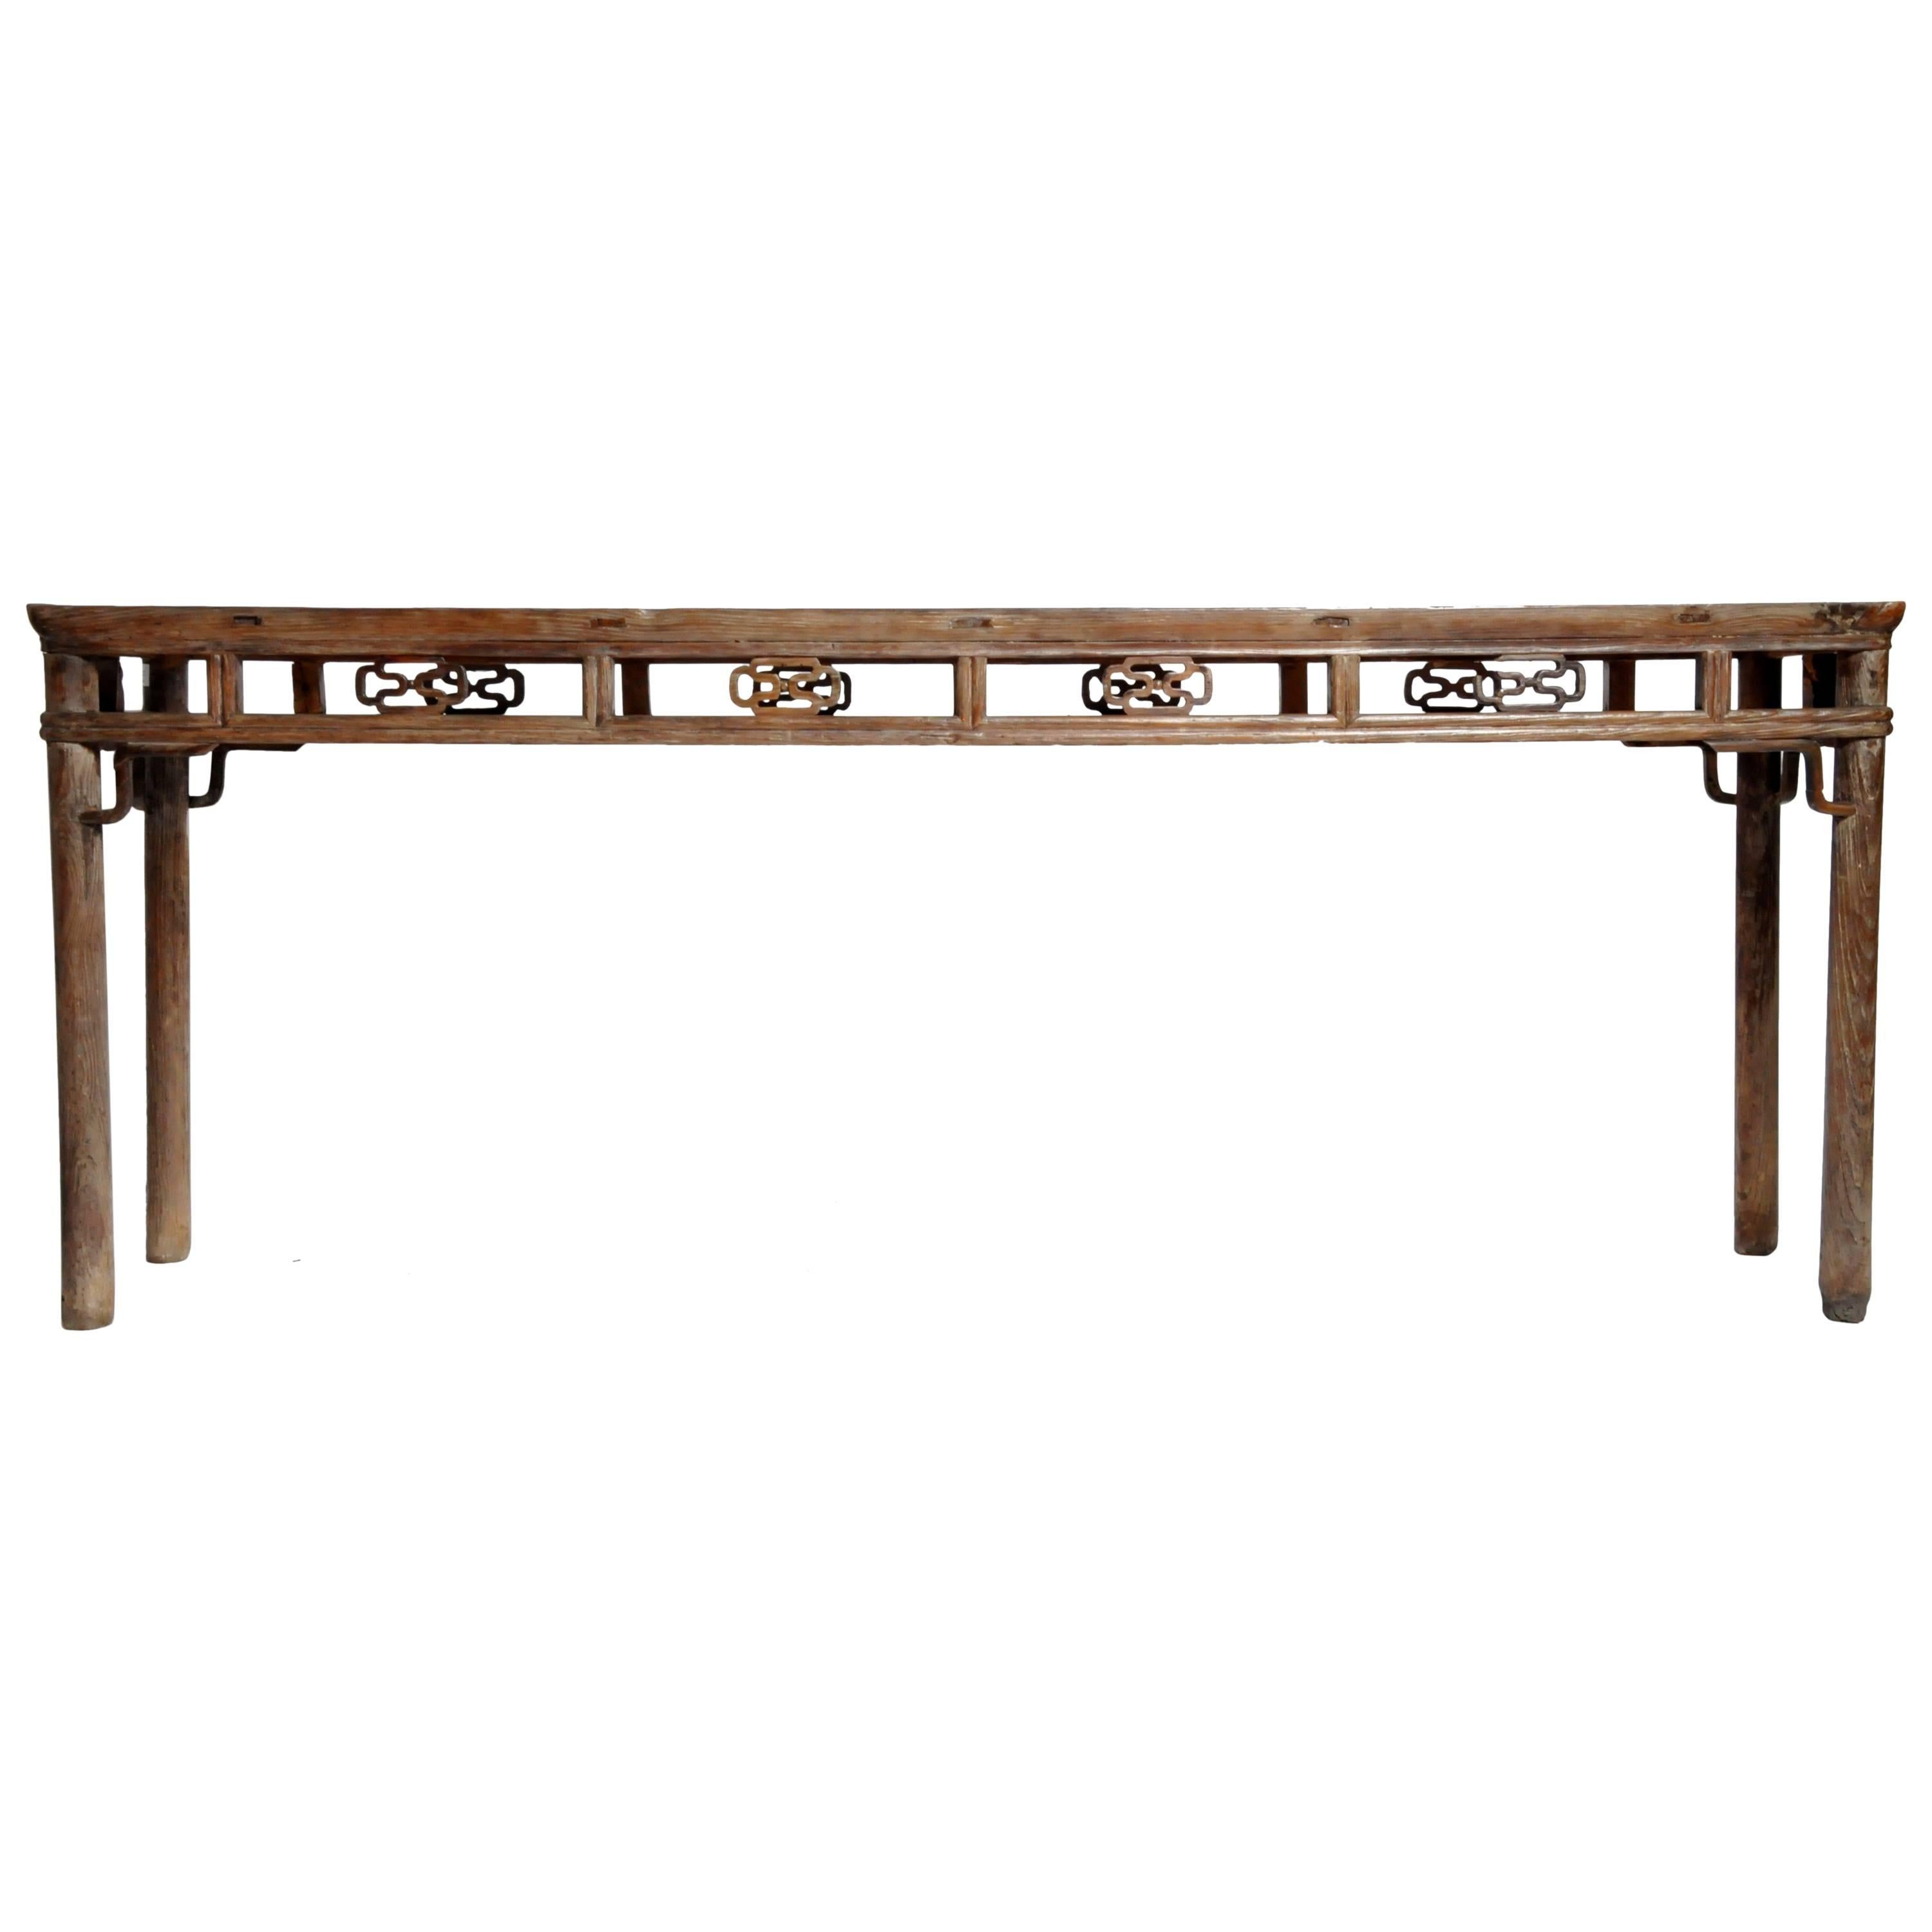 Qing Dynasty Altar Table with Rounded Legs and Original Lacquer